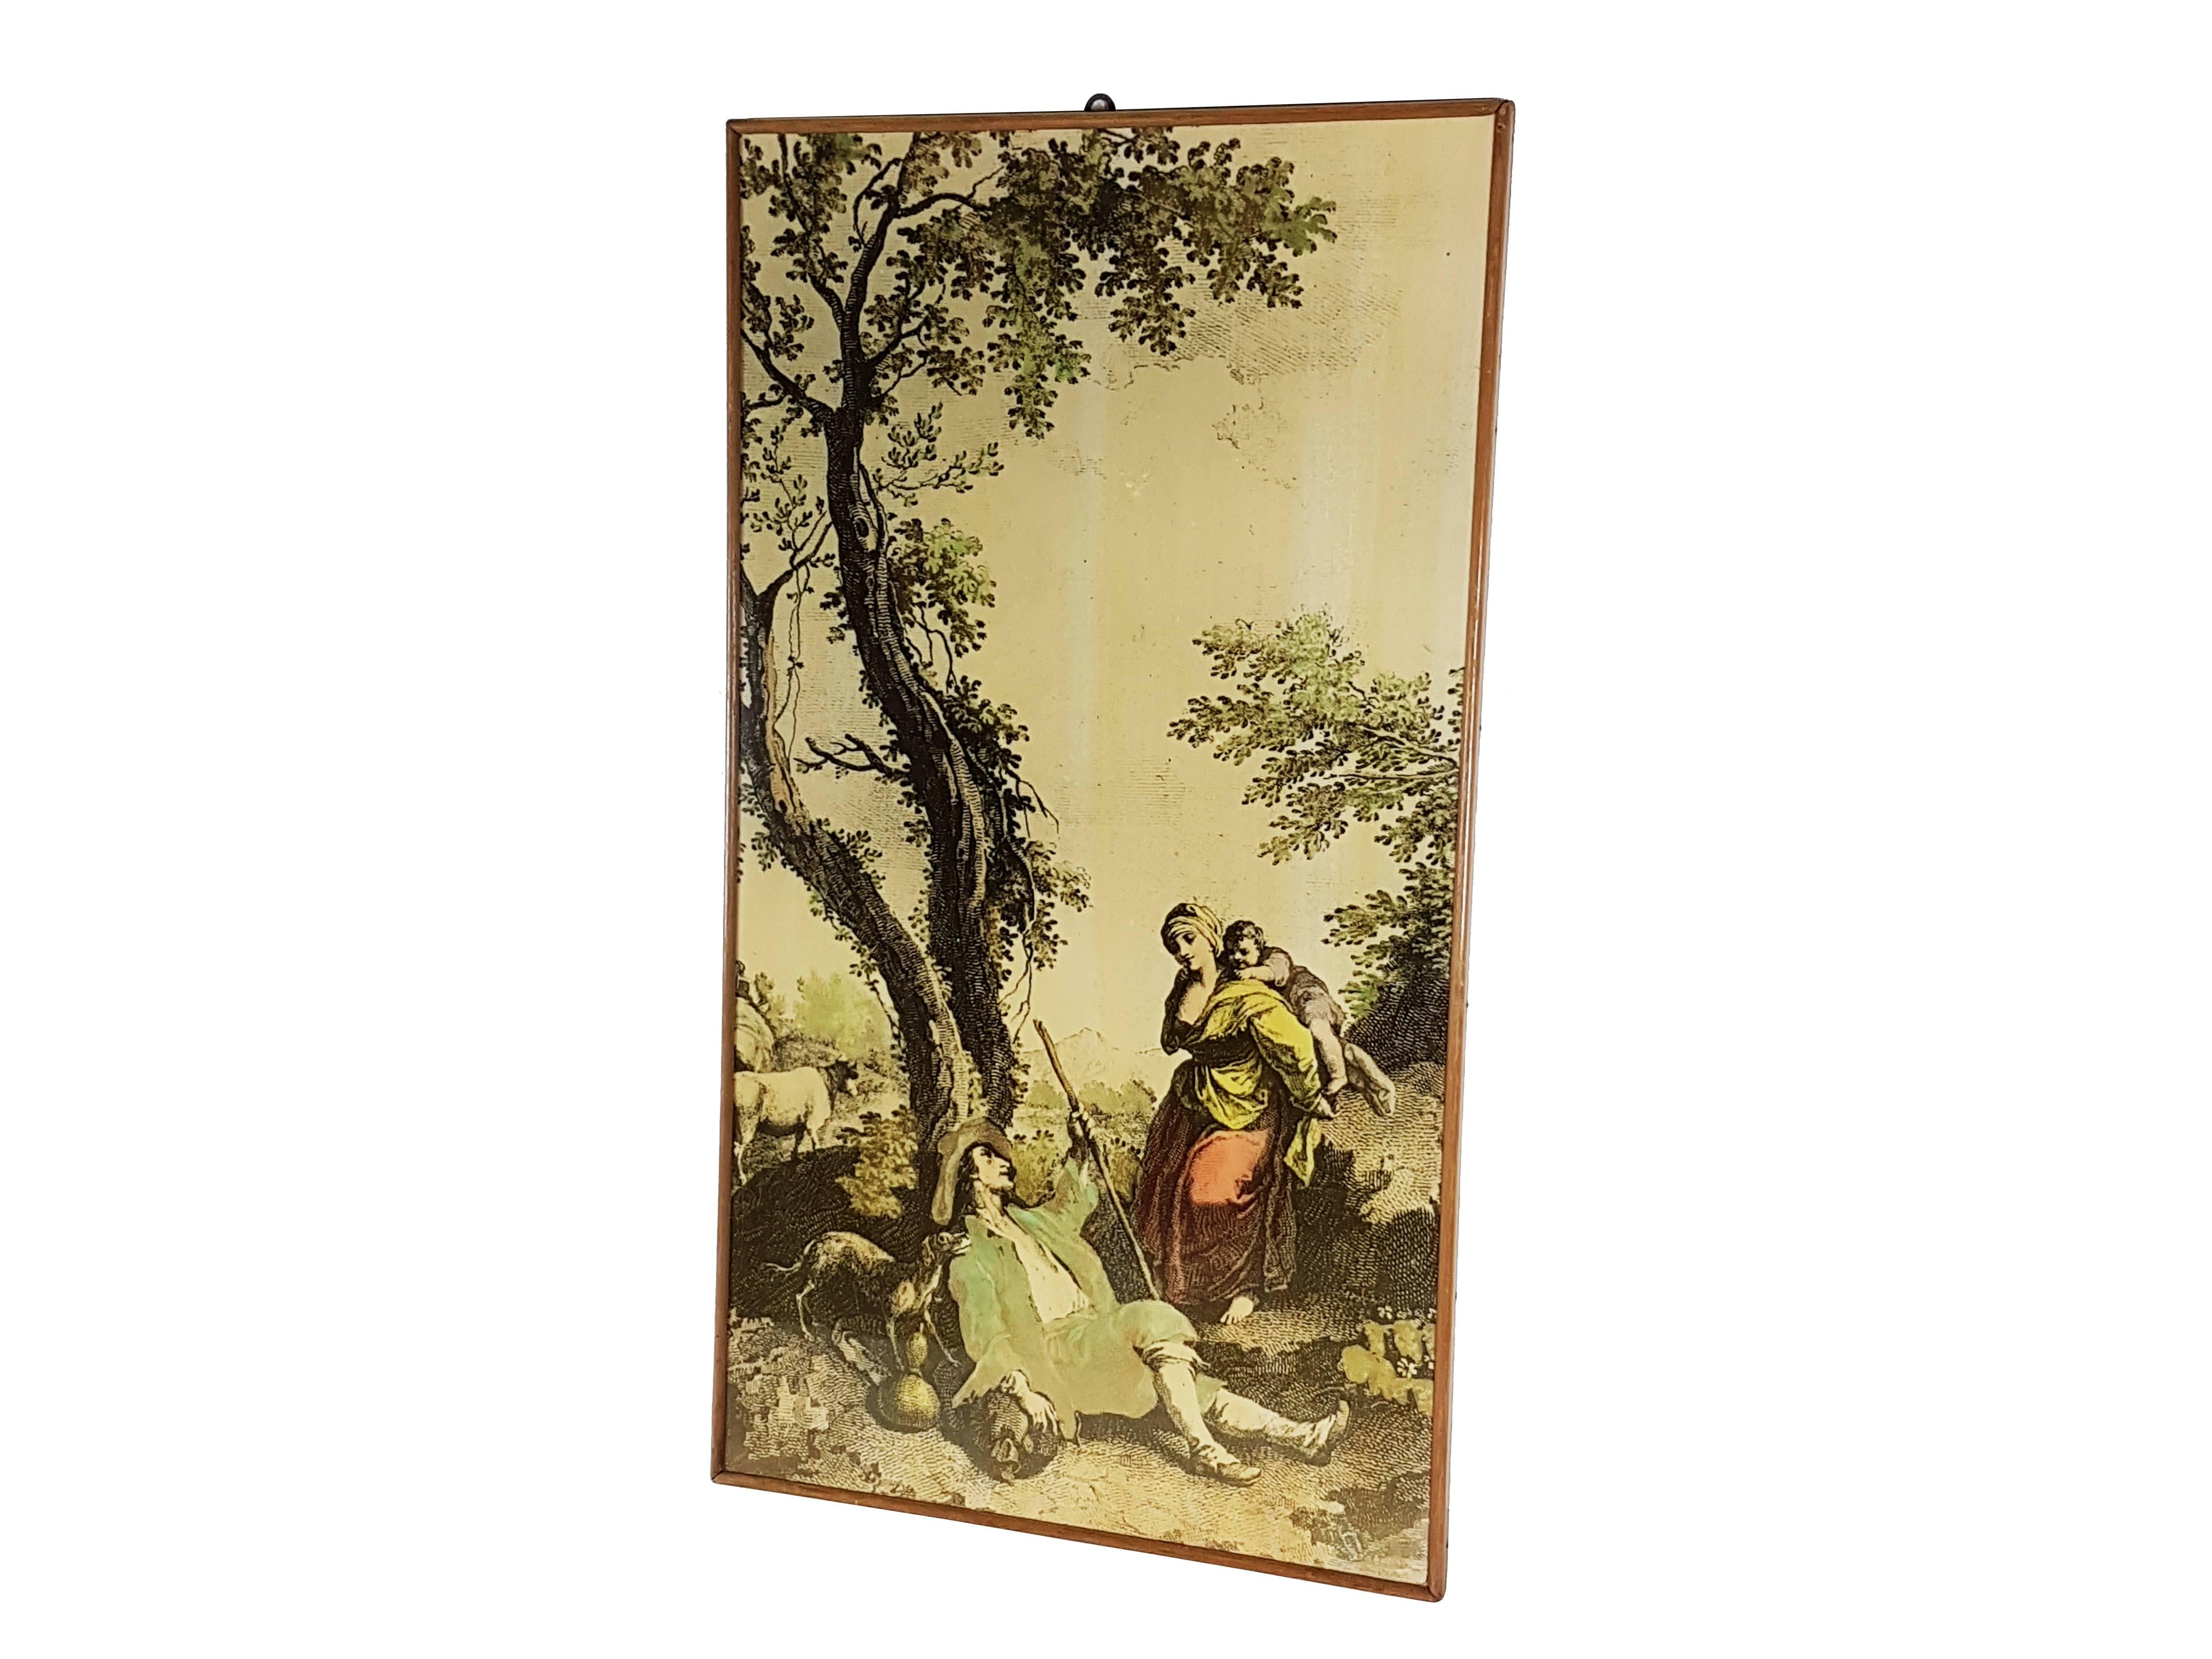 His picture is made from a wooden frame with a bucolic print subject covered by nitrocellulose finishing. This is a kind of decoration typical of the midcentury Italian furnishings.